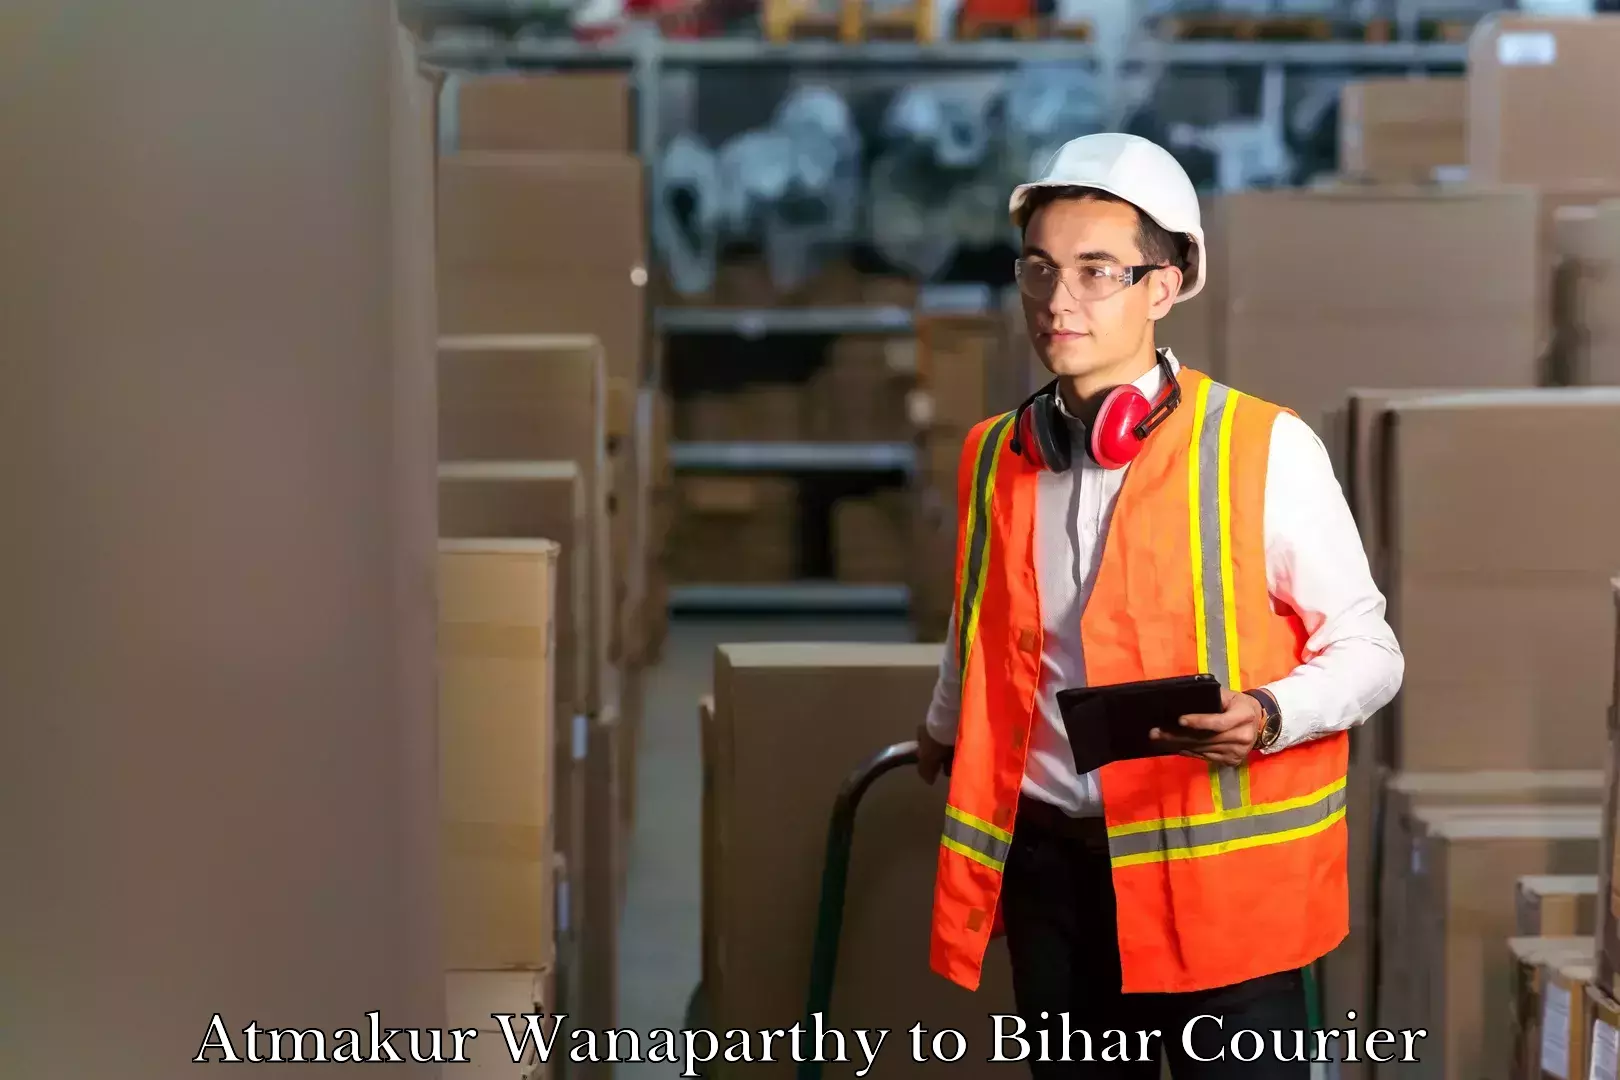 Luggage transport consulting Atmakur Wanaparthy to Bihar